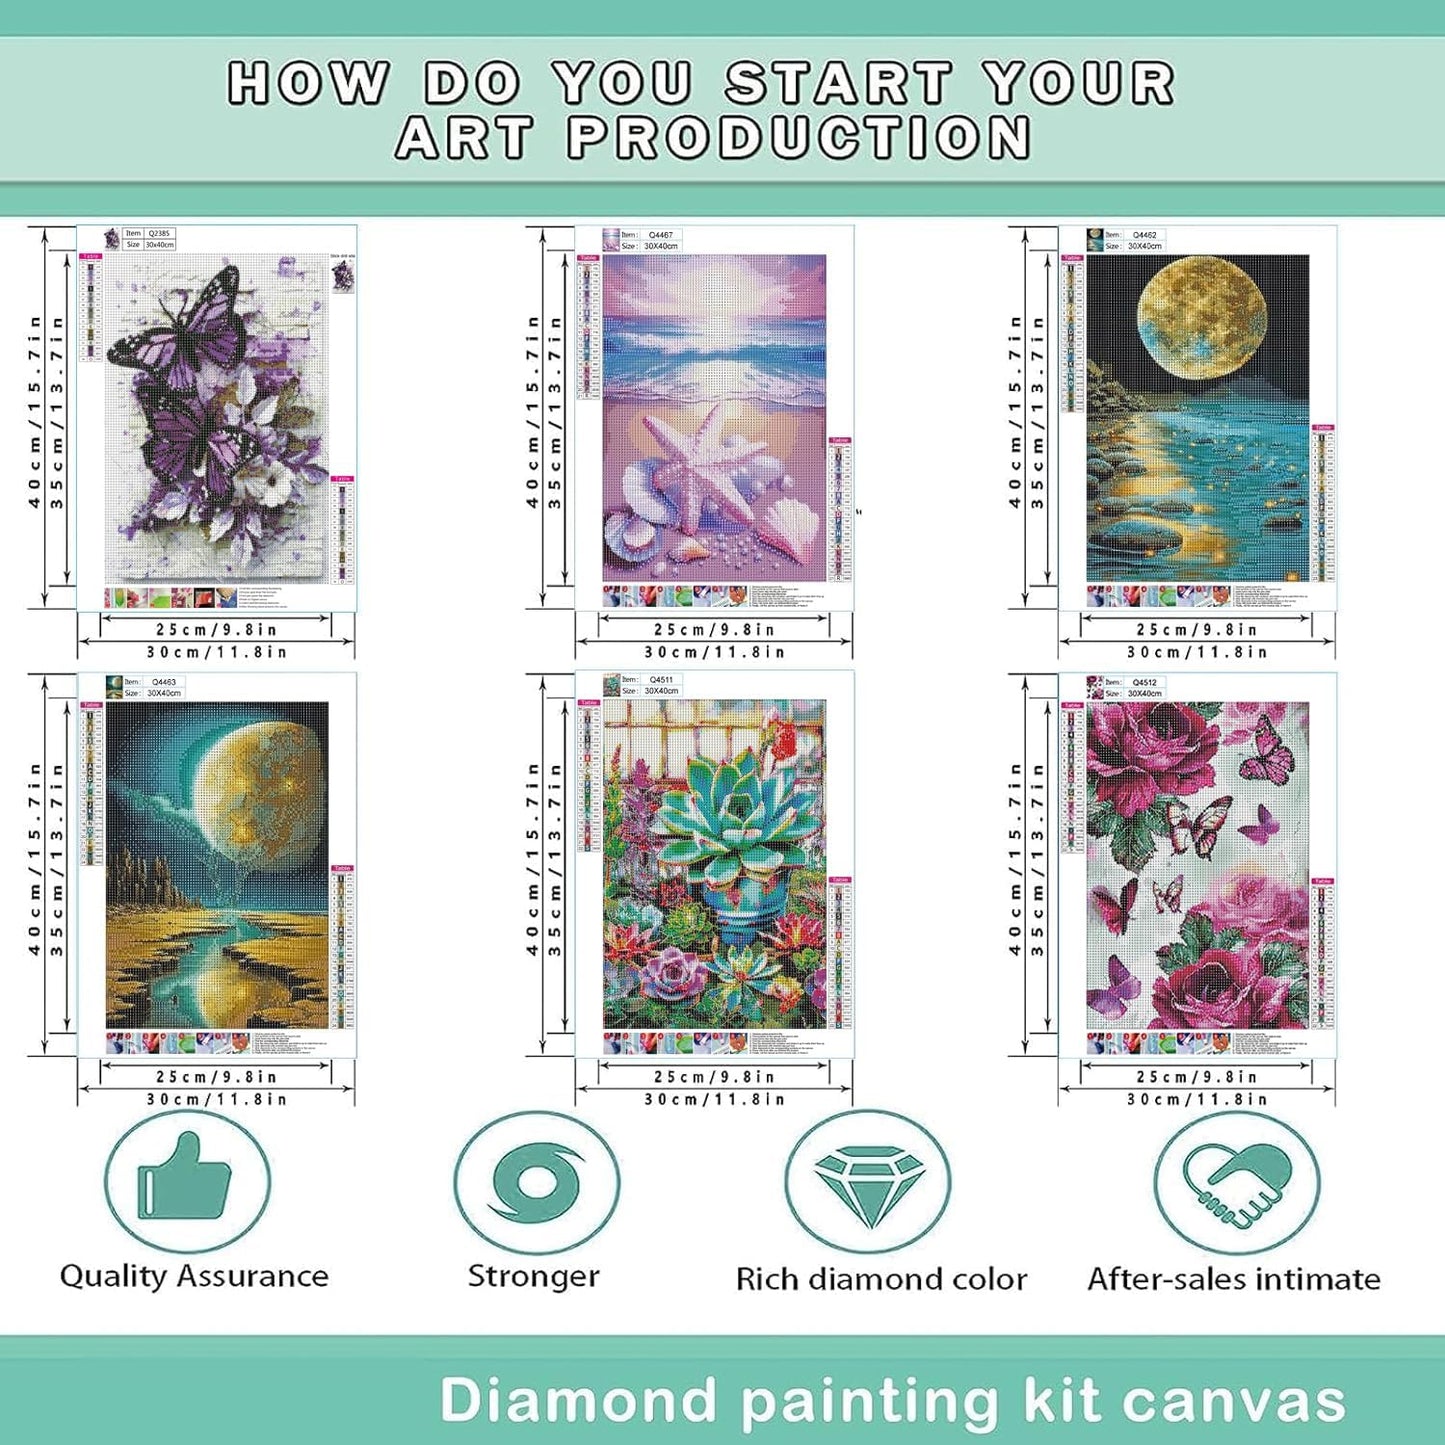 6 Pack Butterflys Diamond Painting Kit Full Drill 5D Diamond Painting by Number Kits for Adults Beginners Home Wall Decor 16X20 Inch